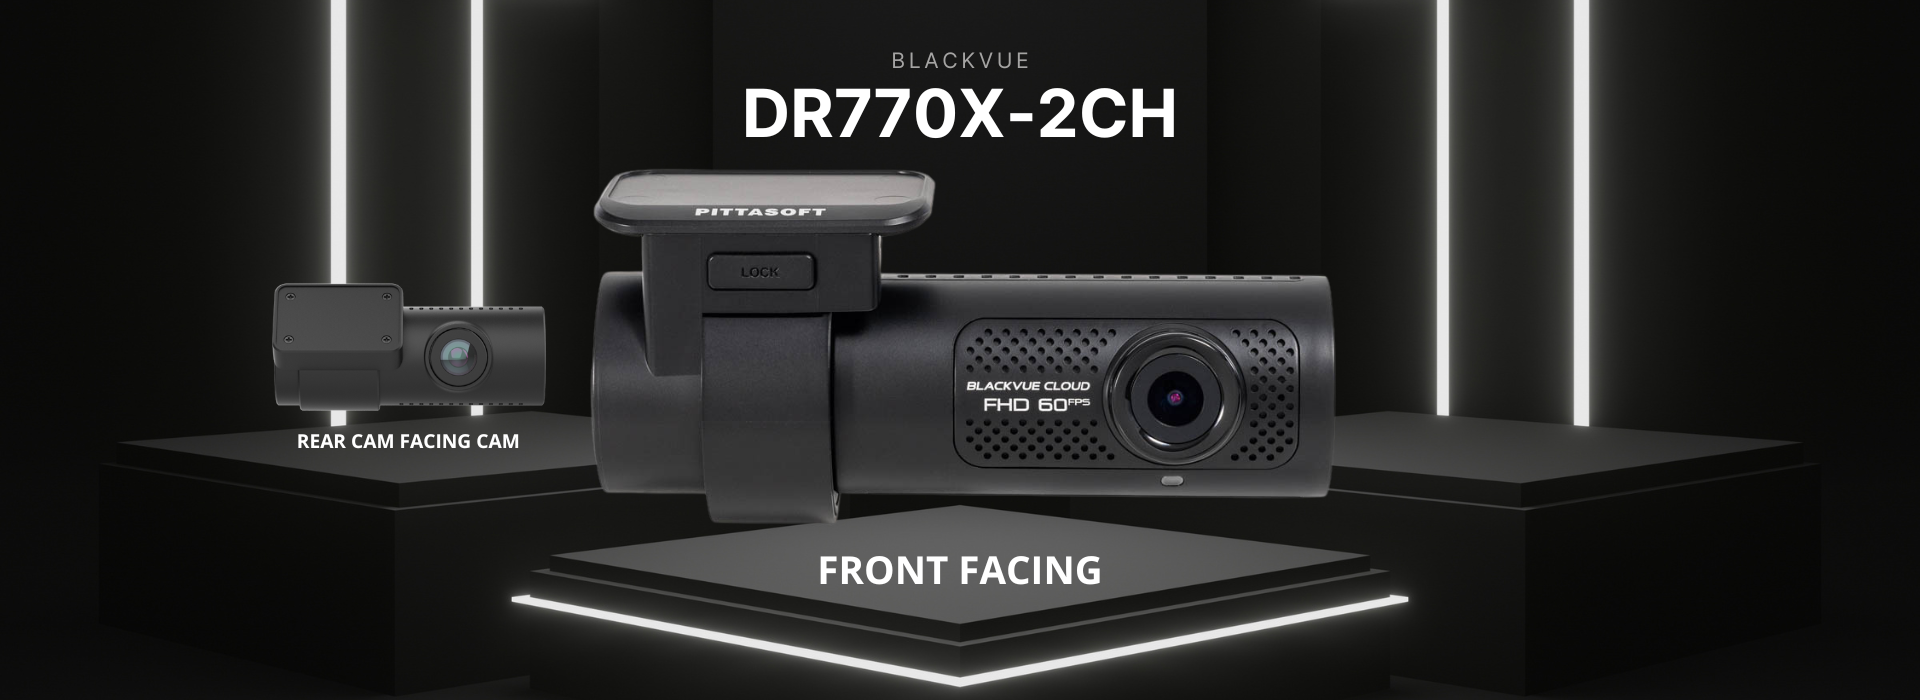 BlackVue DR770X-2CH | For Front + Rear Recording